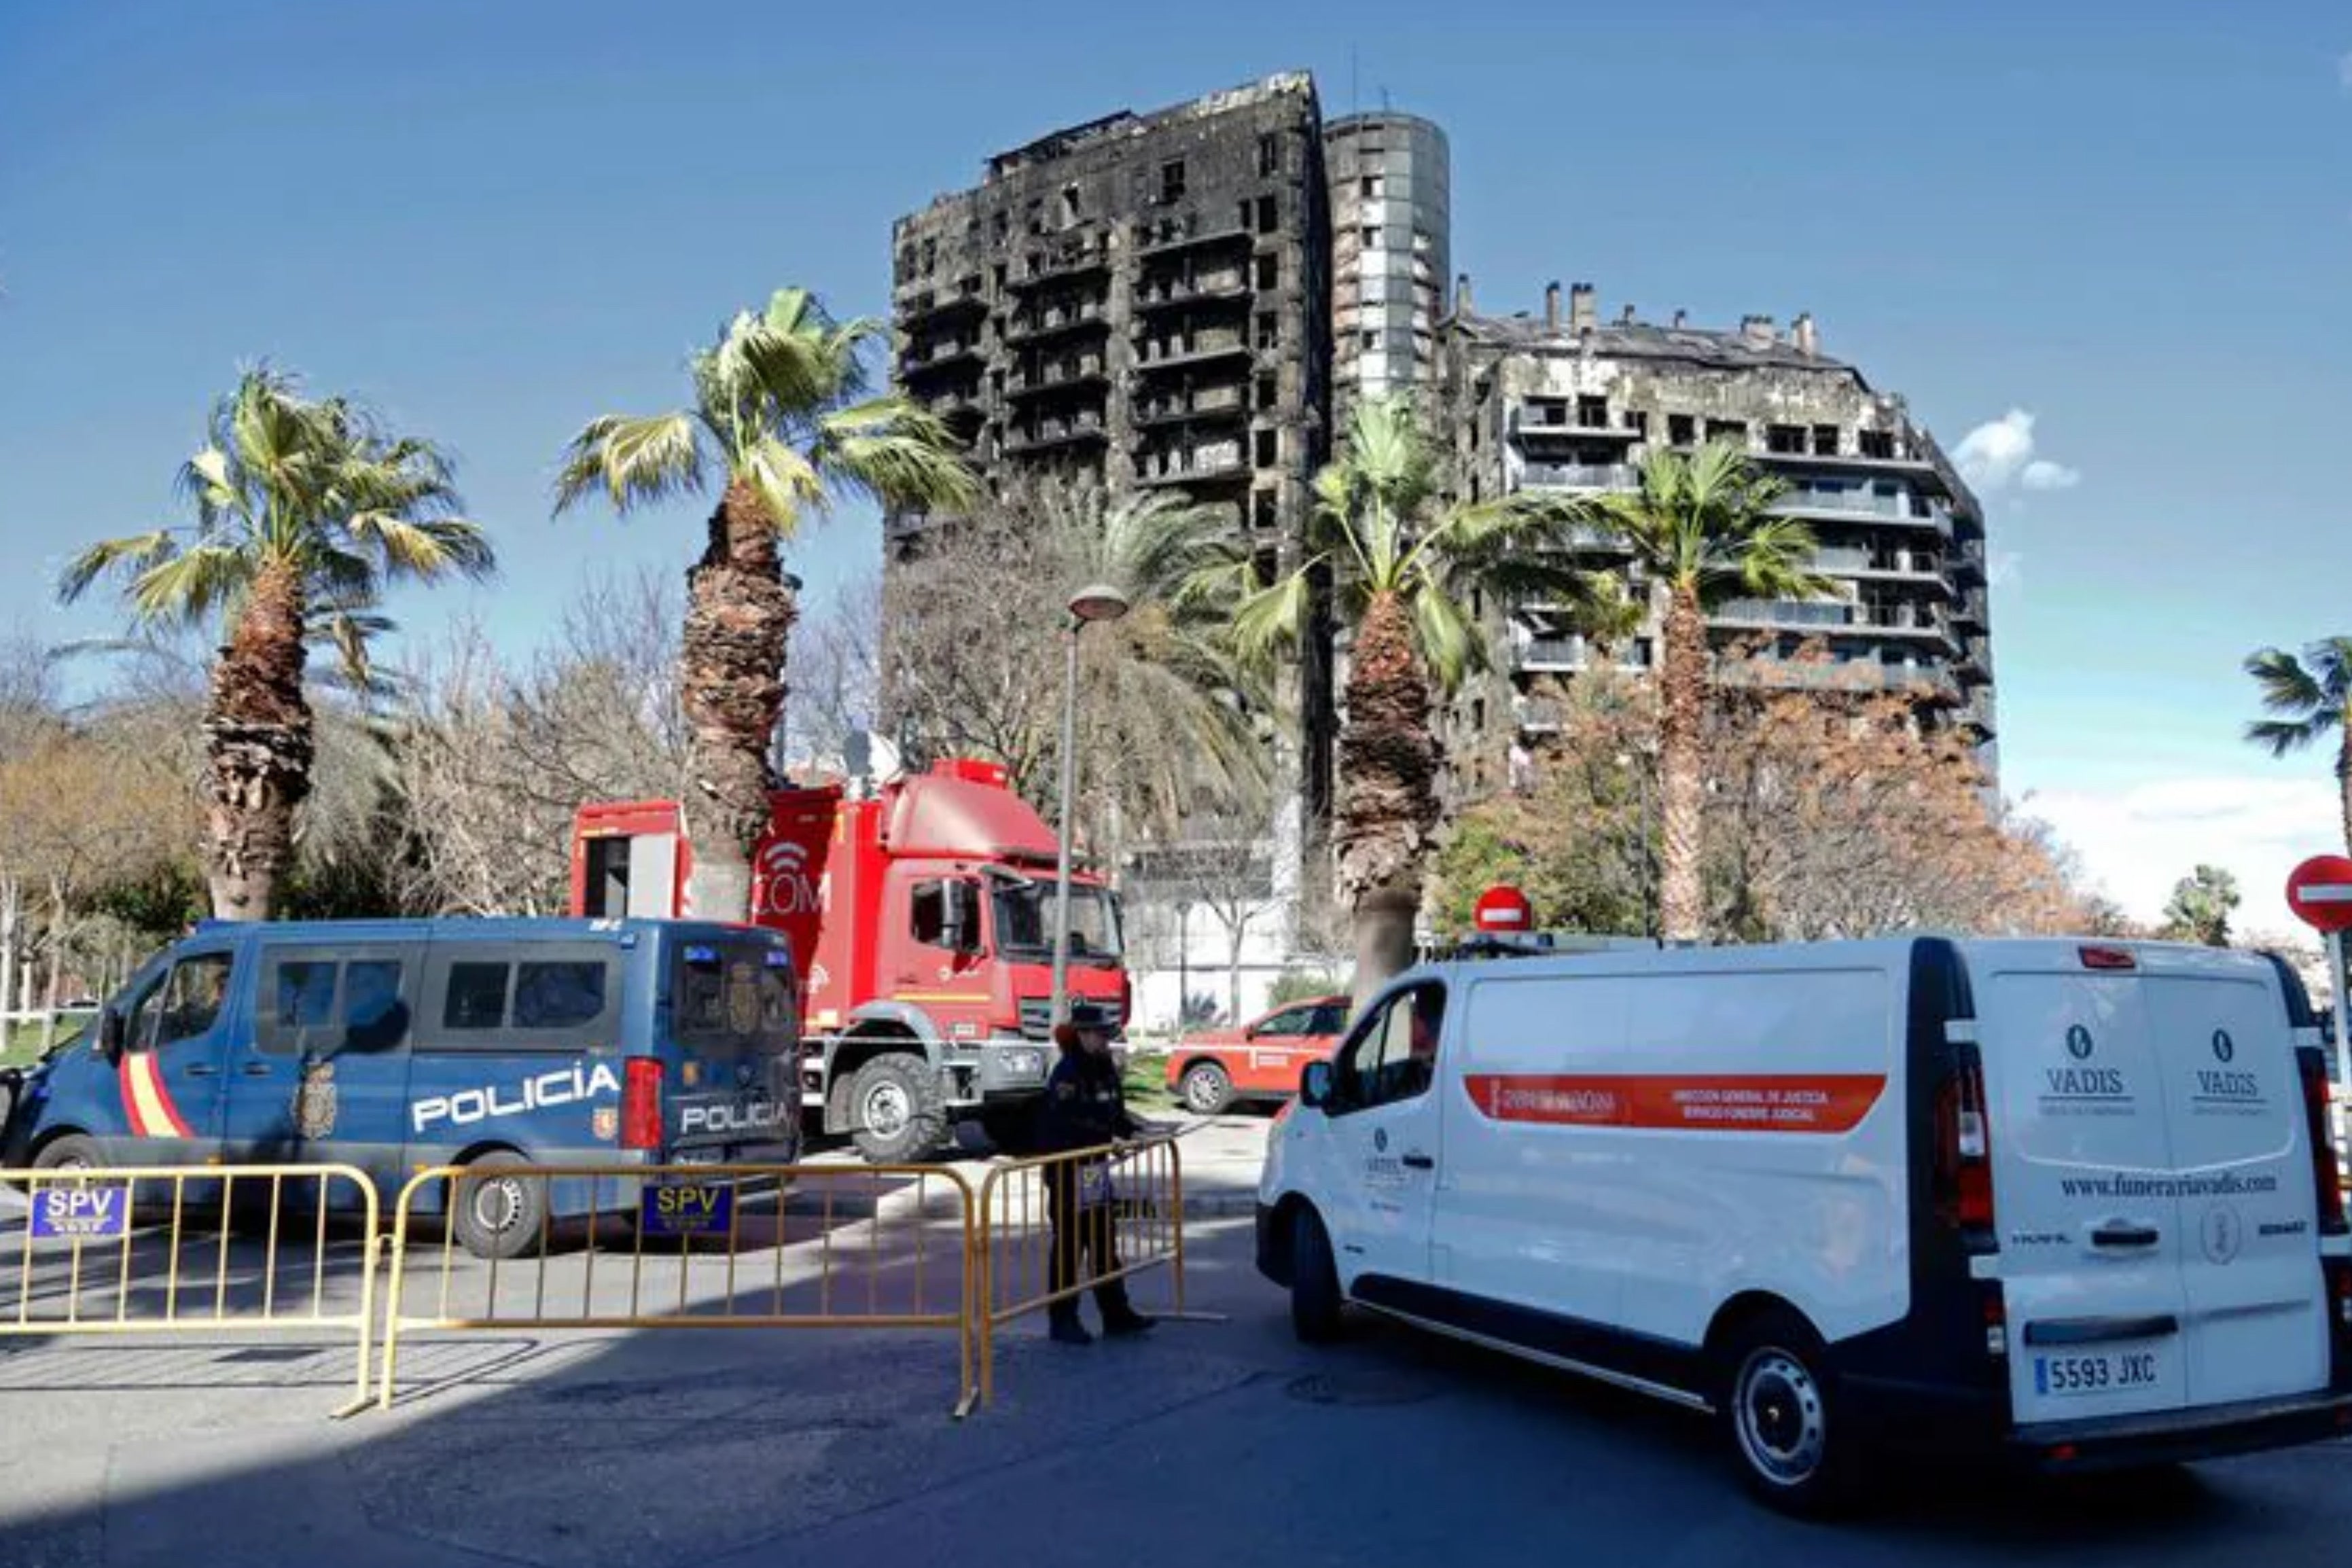 Spain: at least four dead and 14 missing in building fire in Valencia